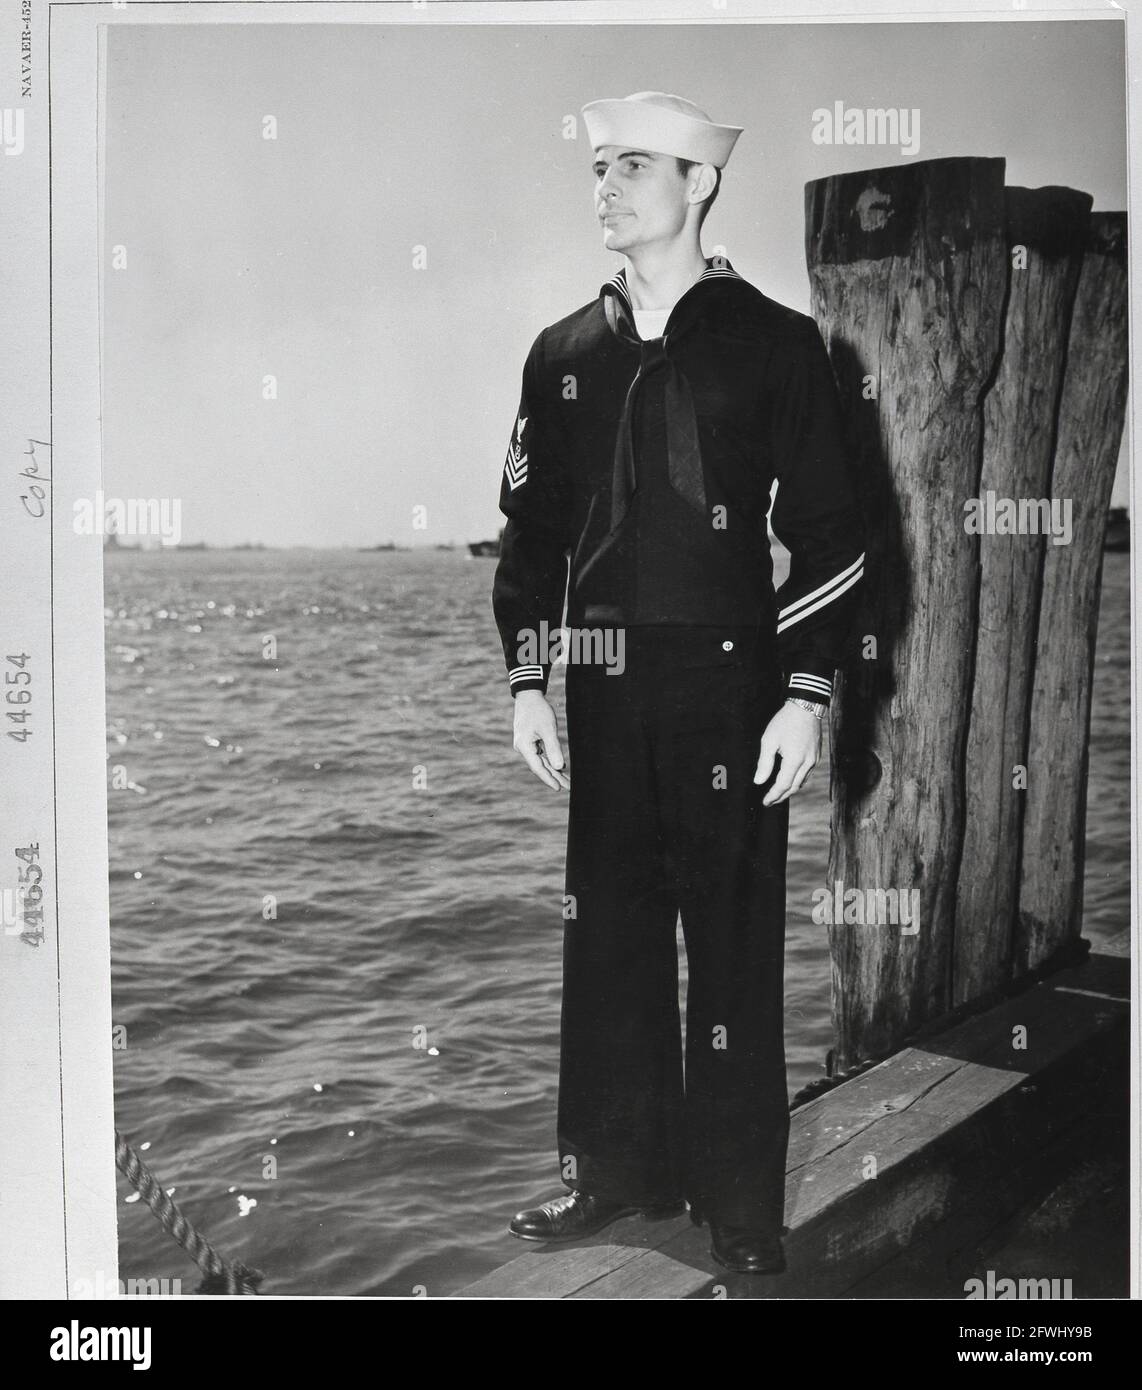 Wwii us navy enlisted uniforms